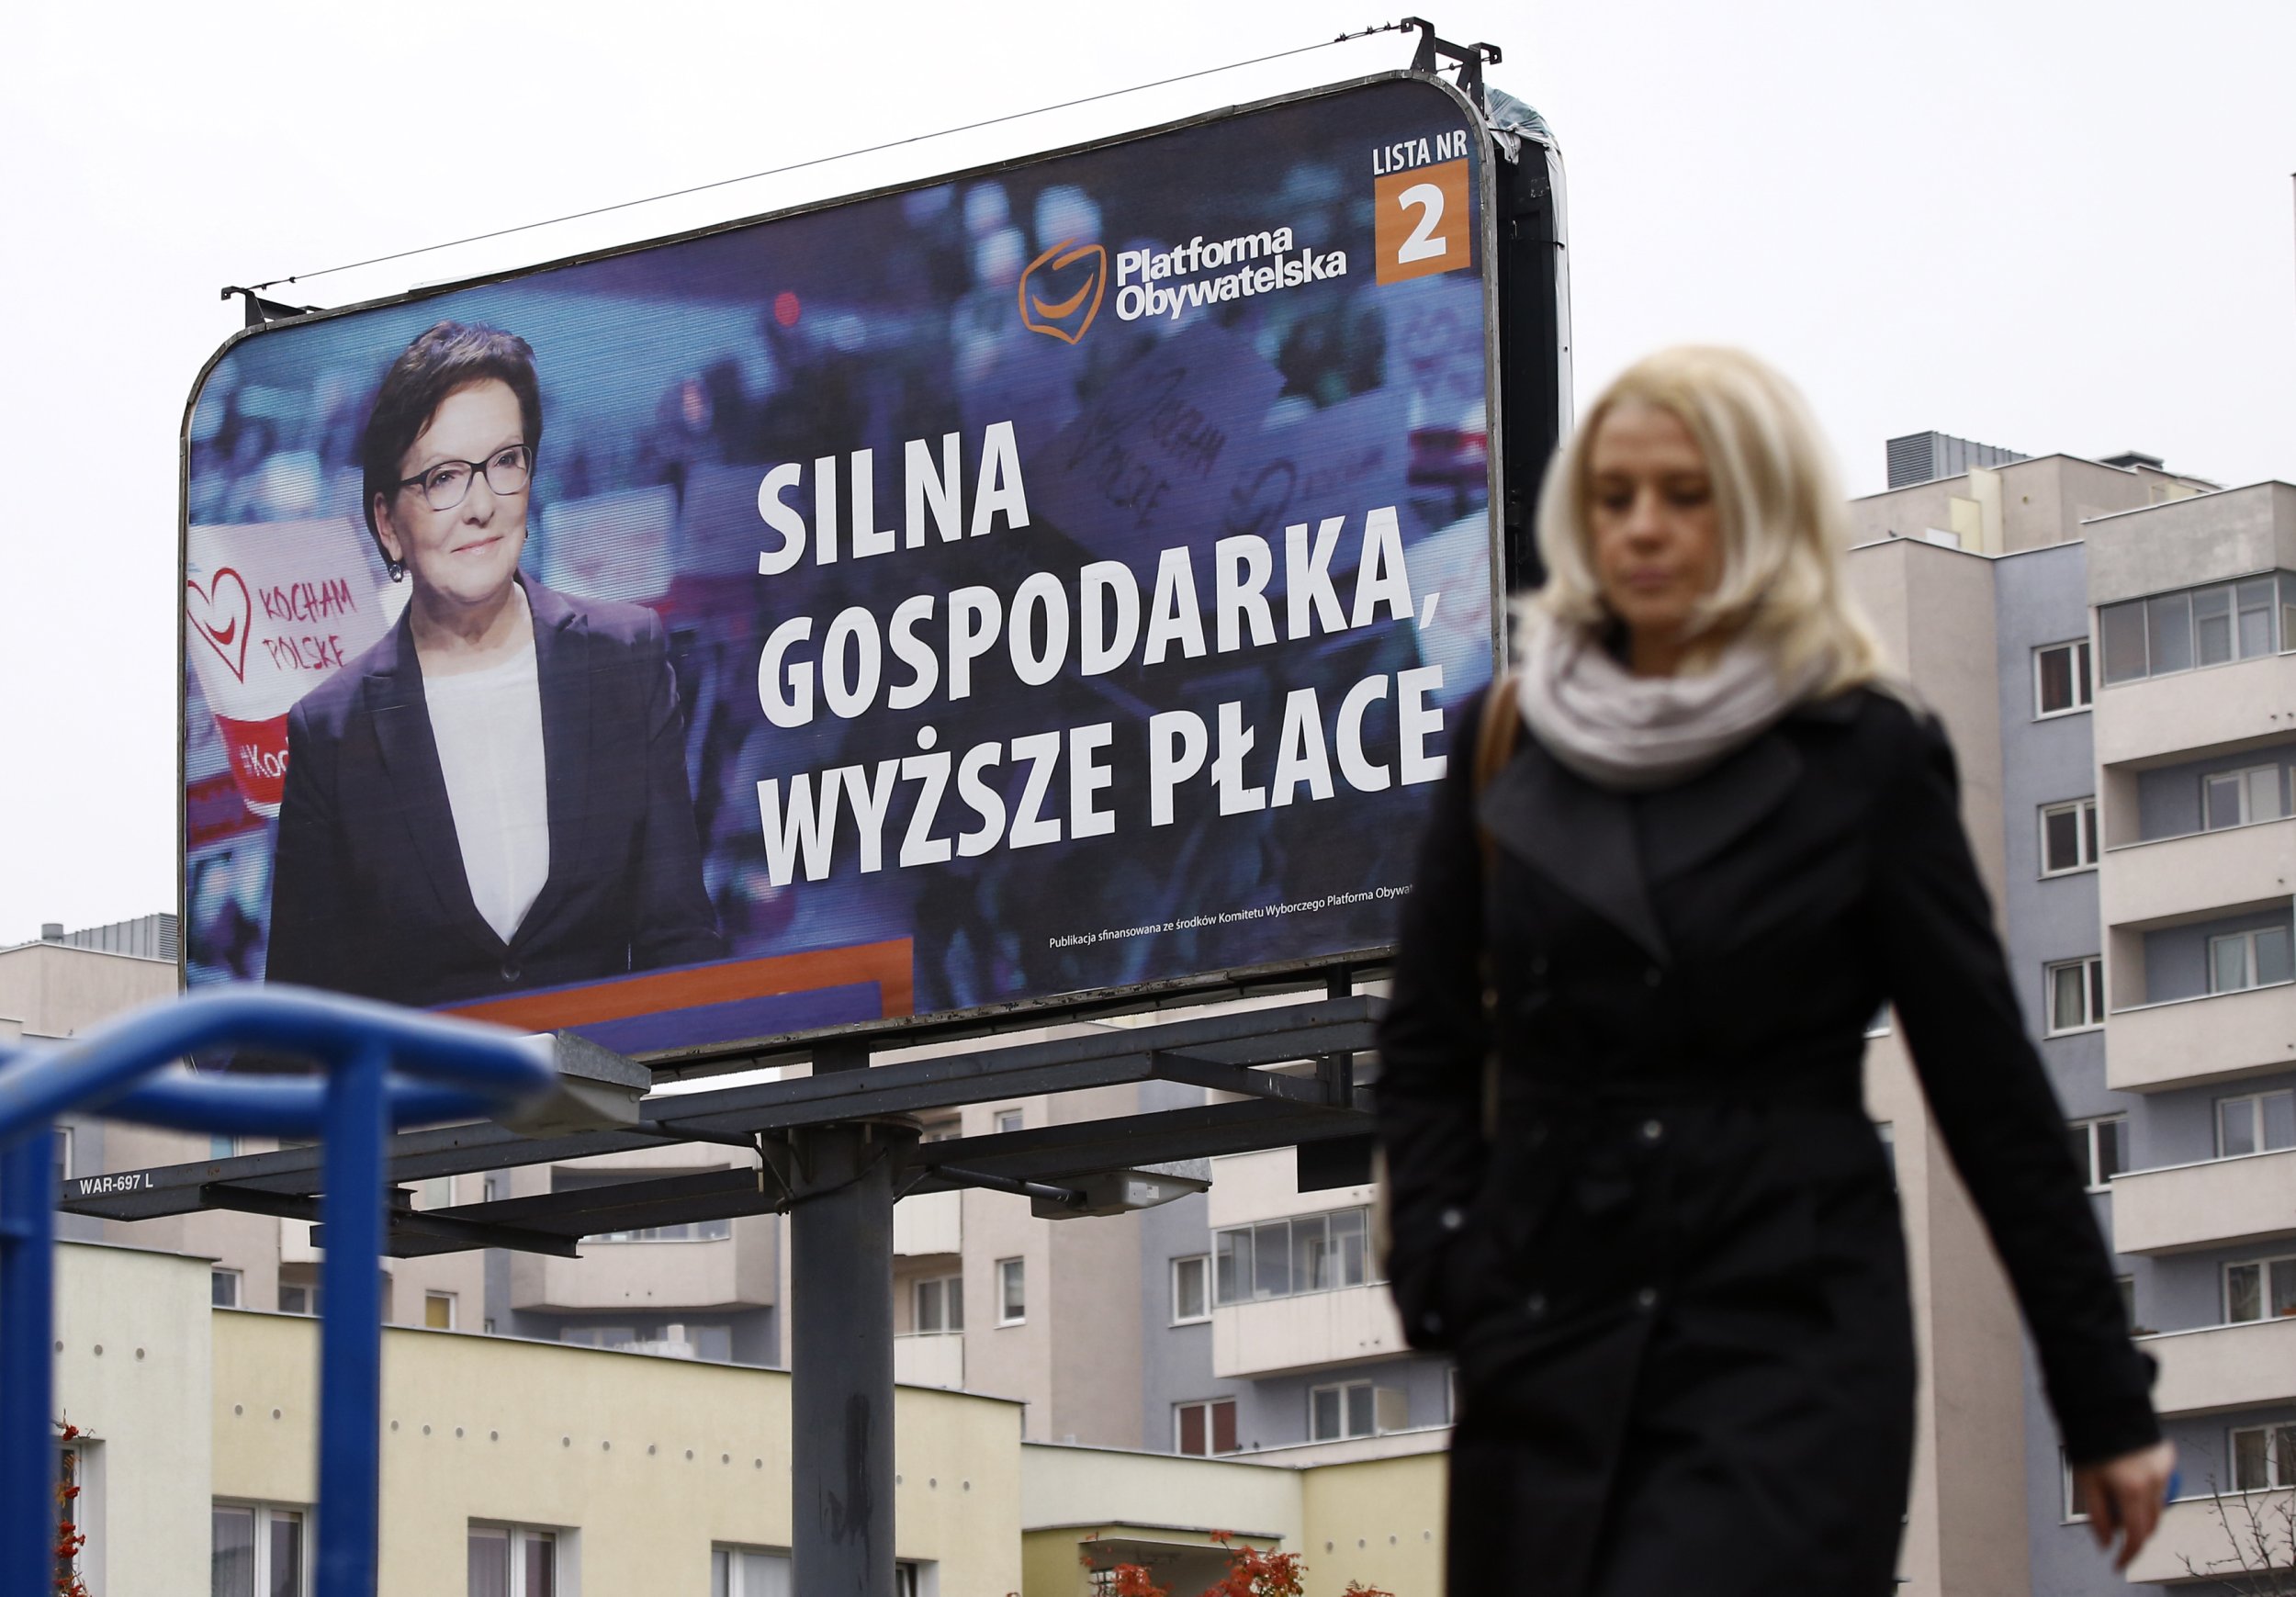 Poland Election Results 2015 Will Euroskeptic Law And Justice Come To